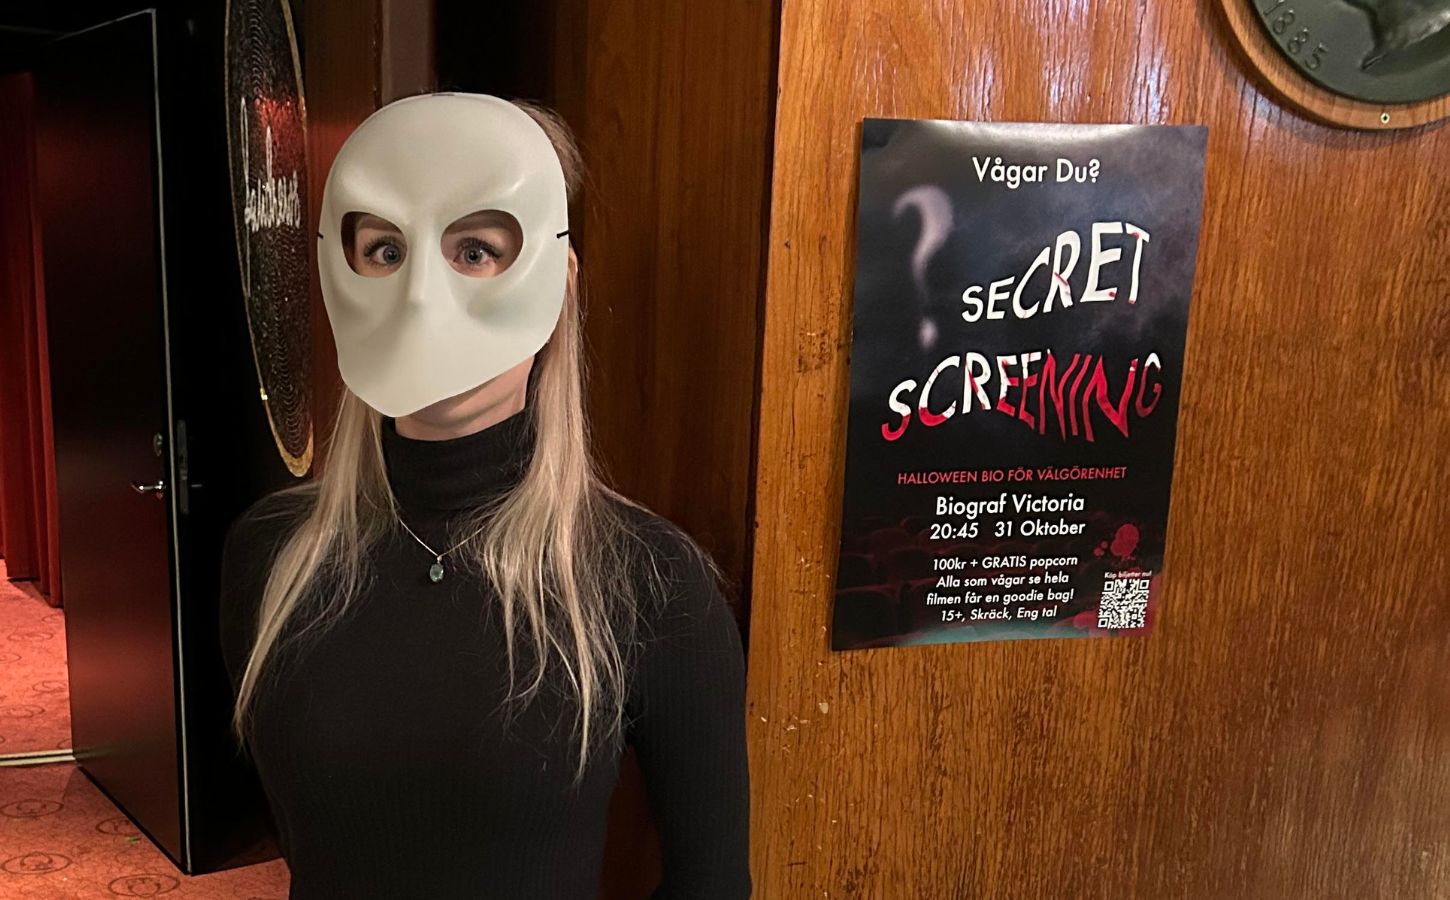 An animal activist wearing a mask at a secret screening of Dominion